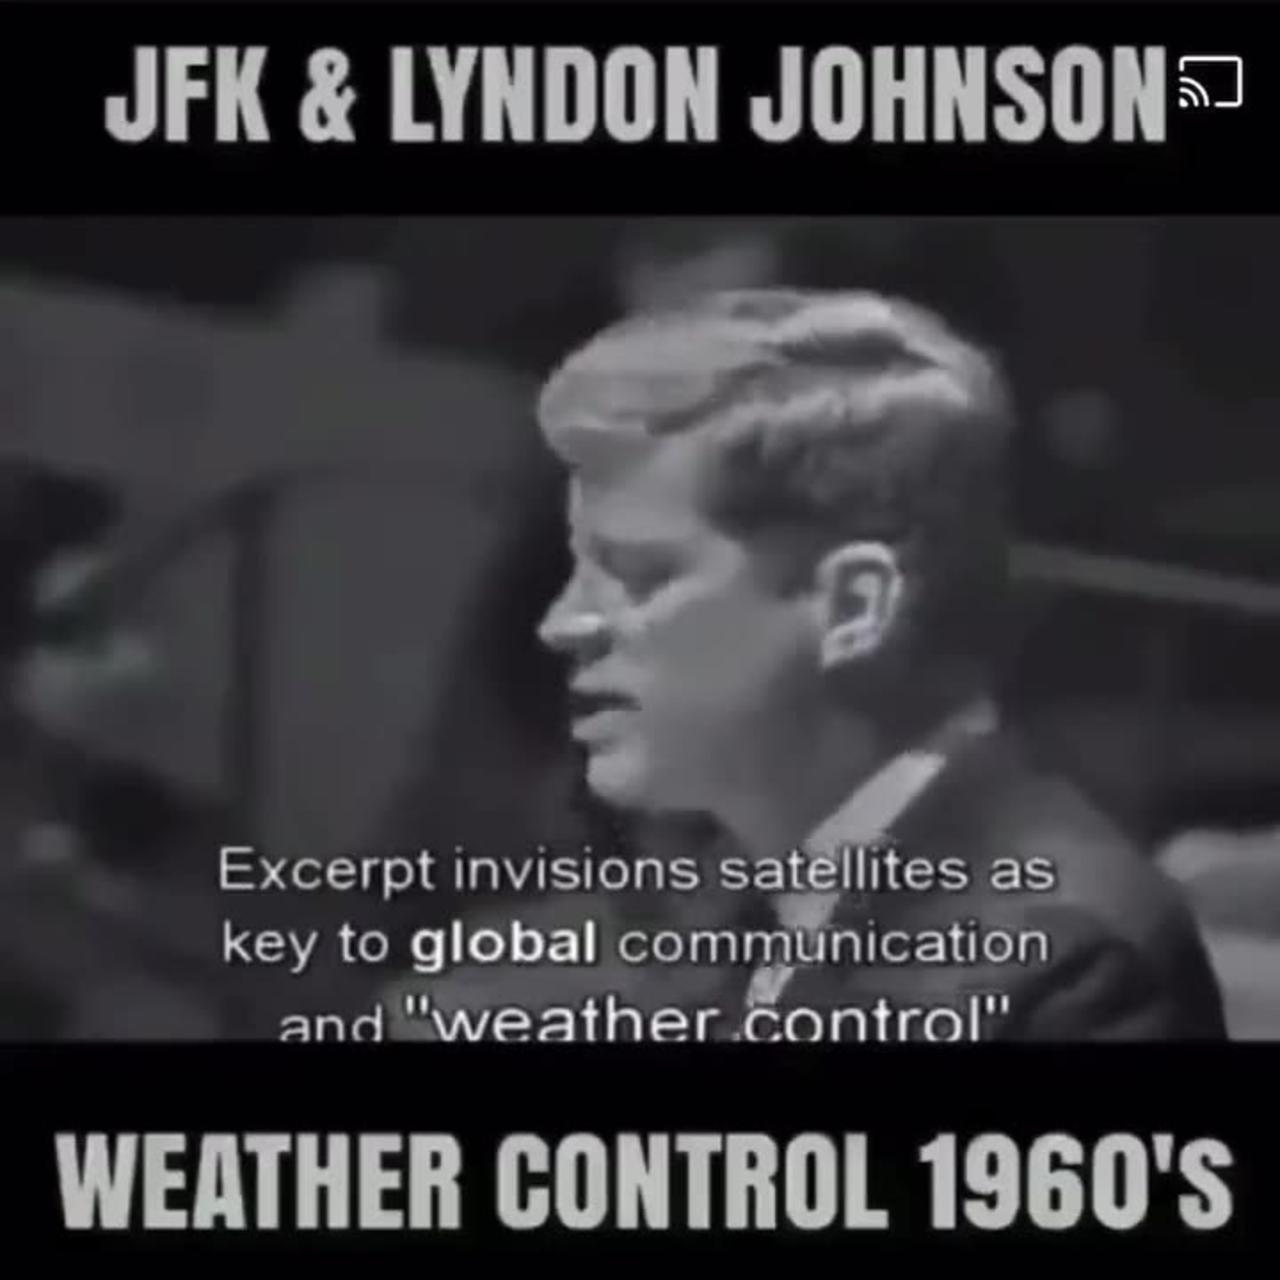 JFK in 1960s about weather control and HAARP: potentially used in Turkey Earthquake?